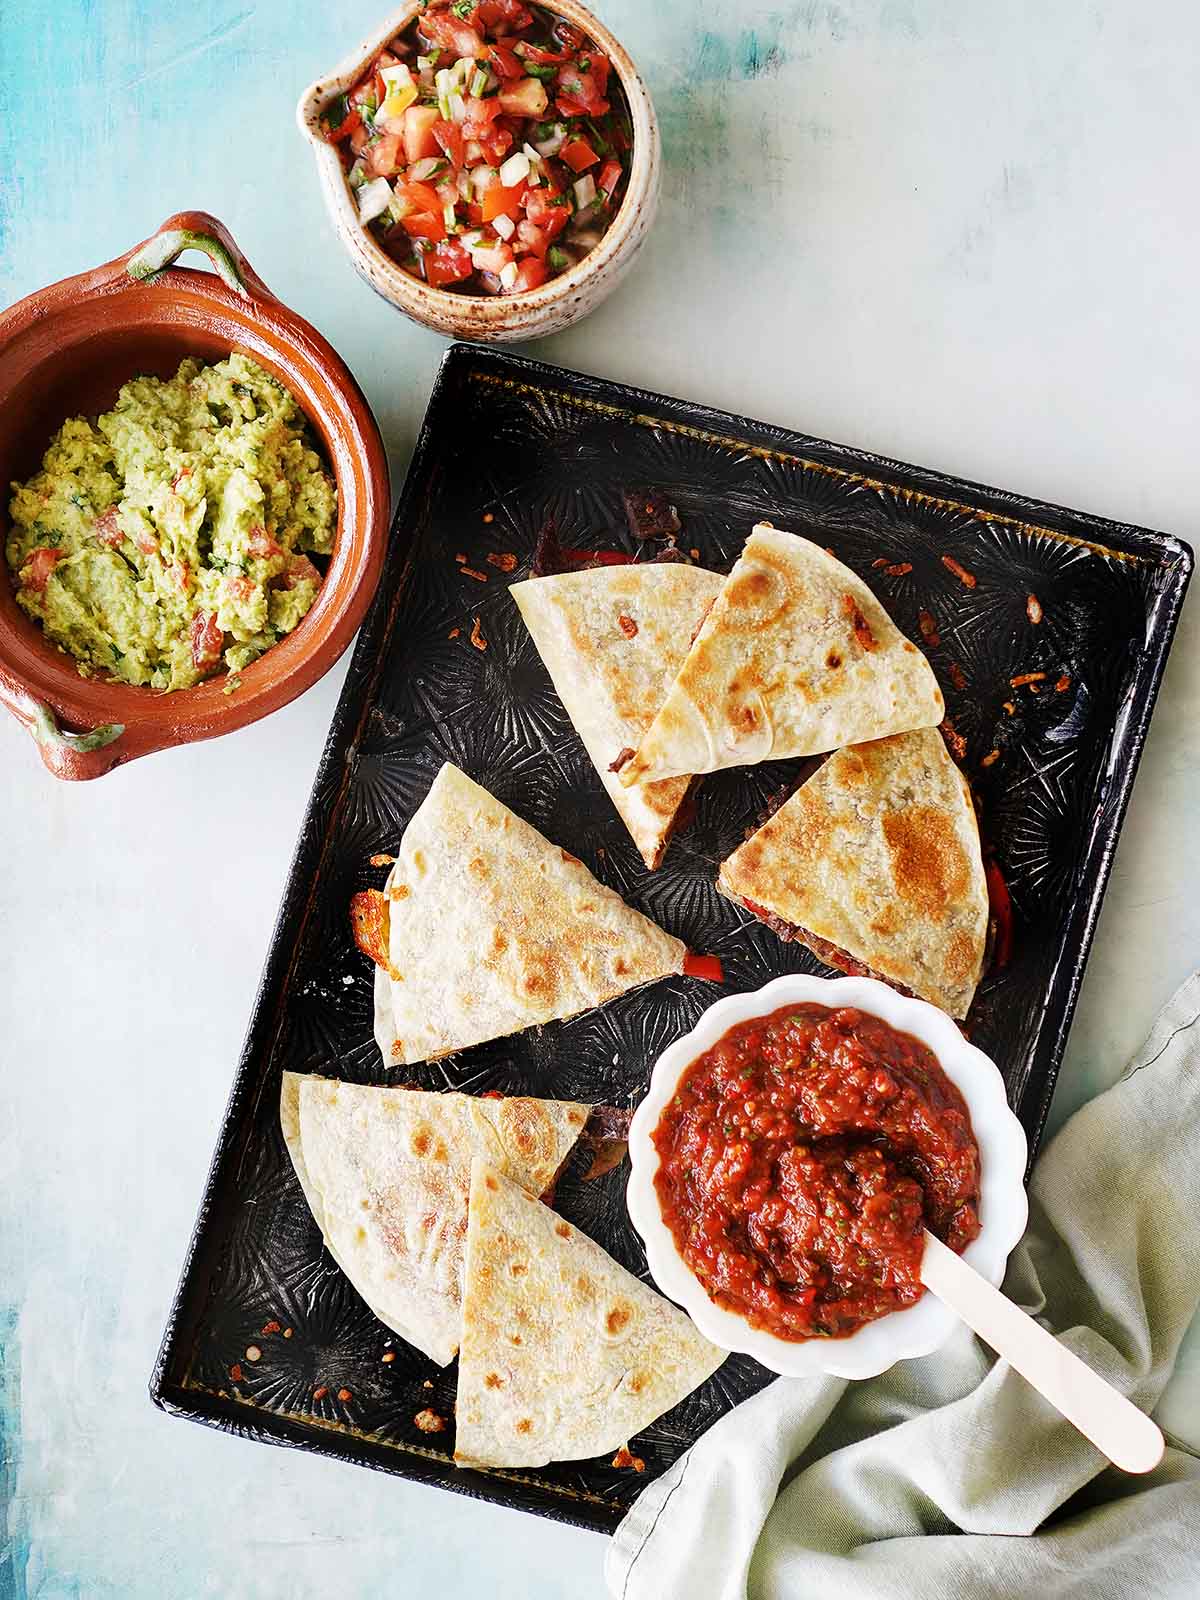 A baking tray with a quesadilla cut into triangle shapes.